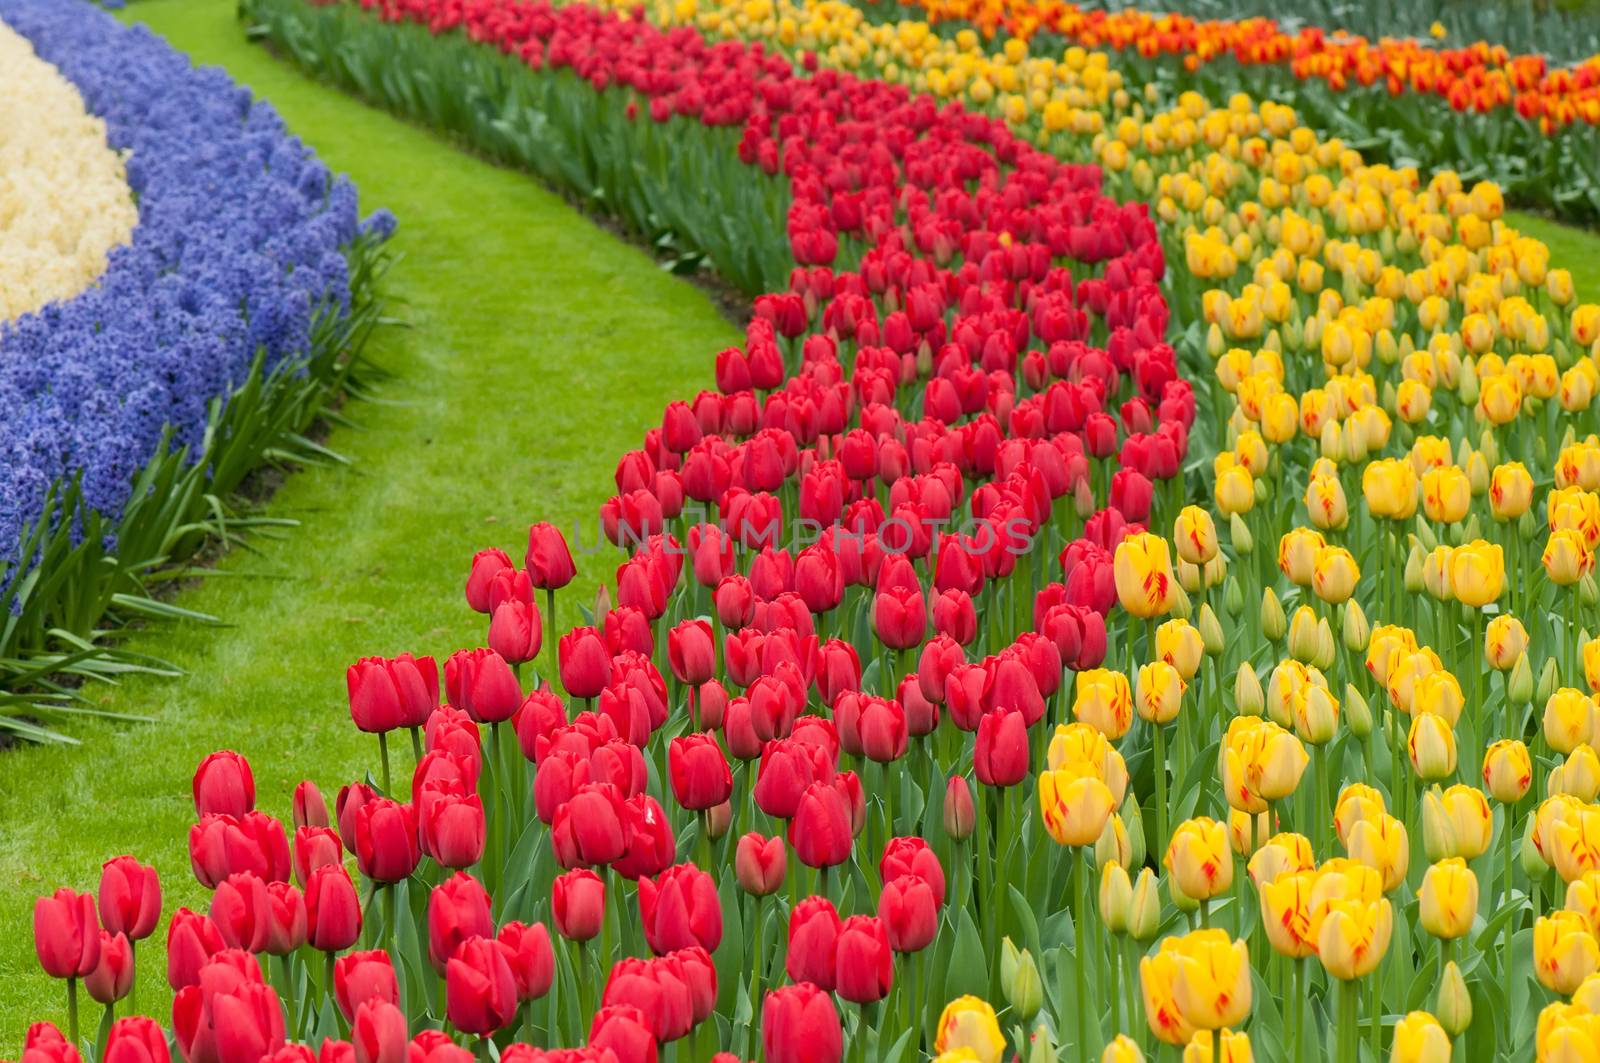 Flower beds of multicolored tulips, many waves